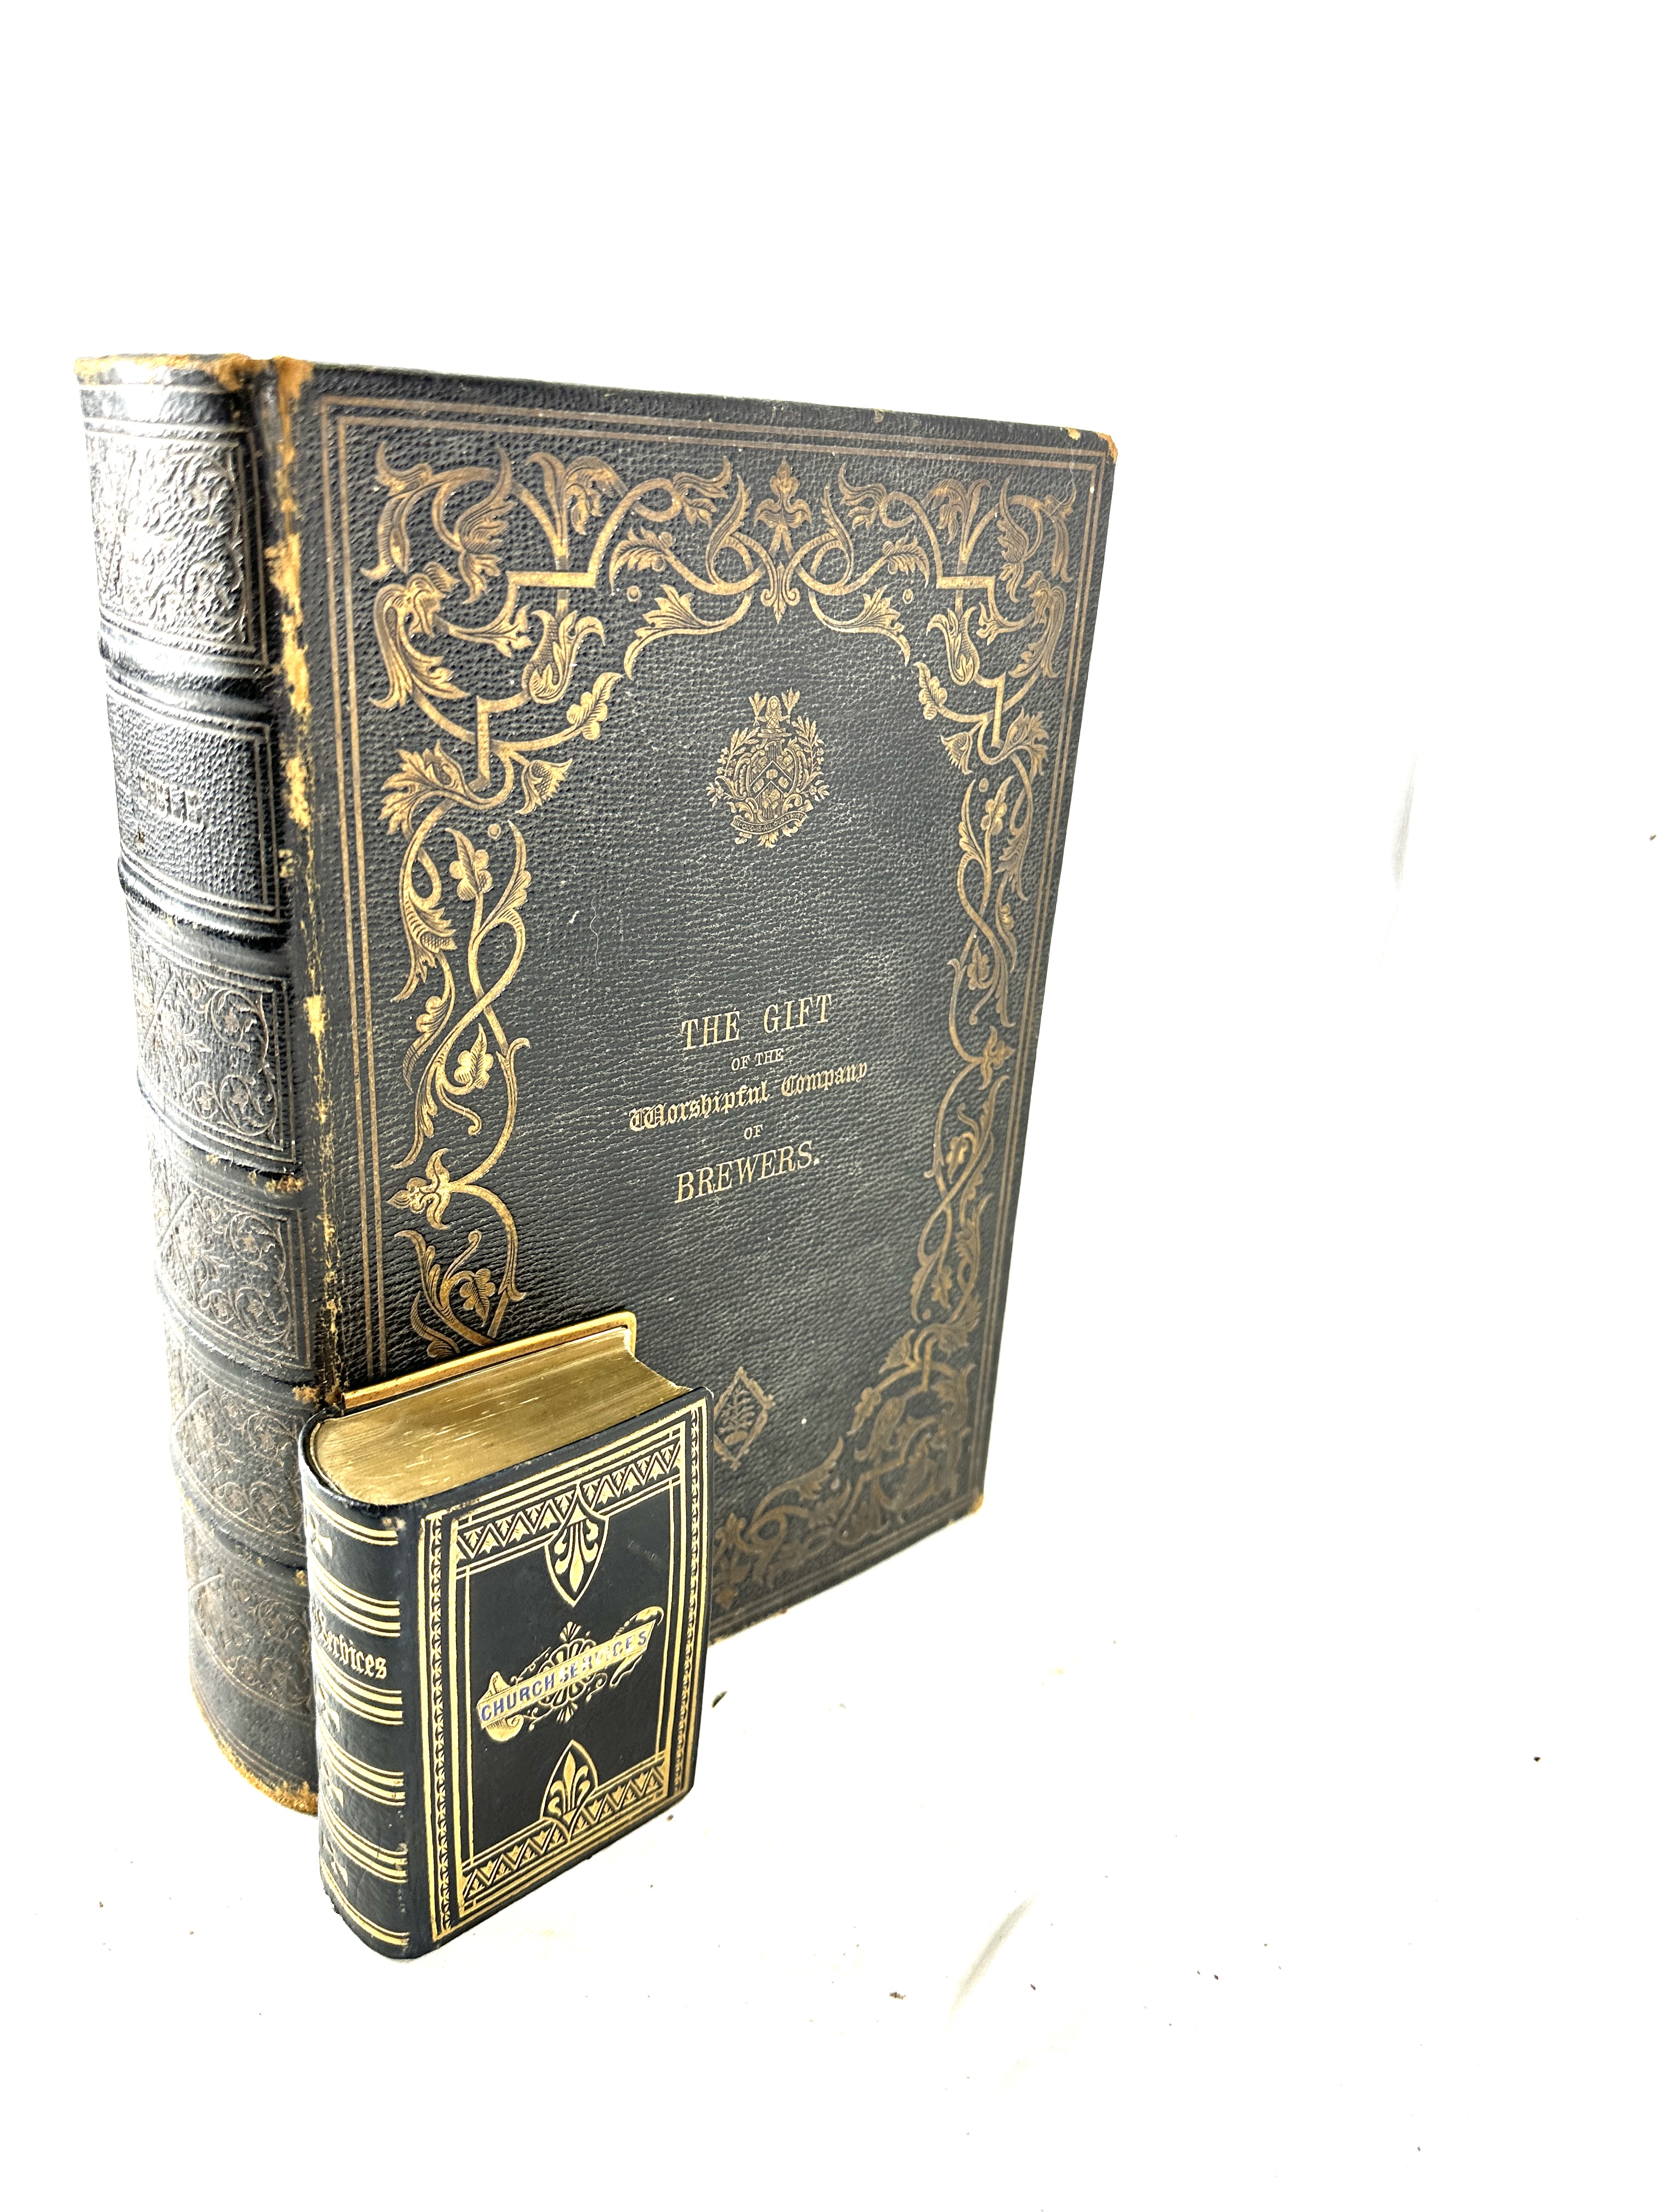 The Holy Bible, 1873; together with a small leather bound Book of Common Prayer